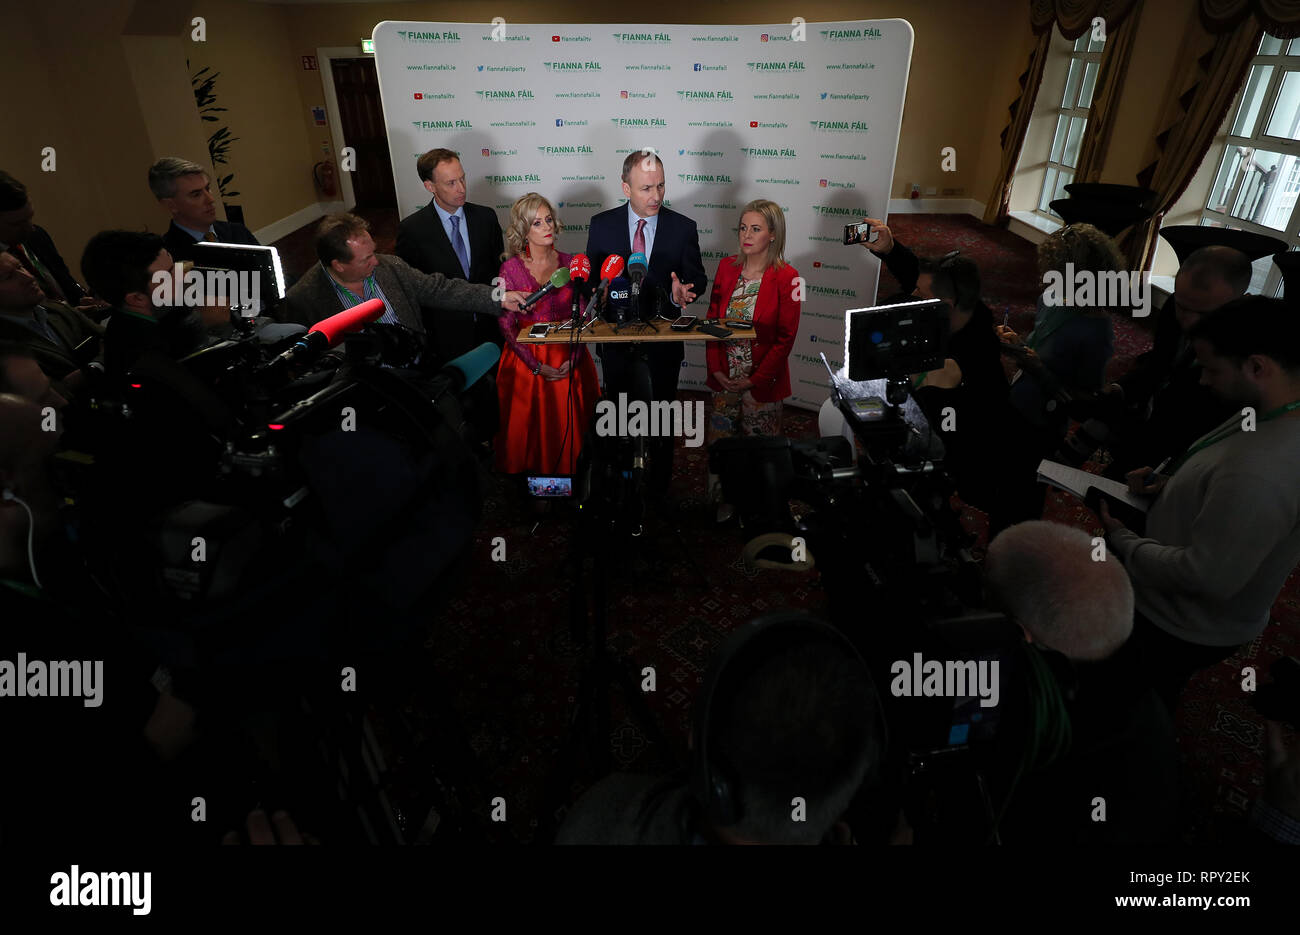 Fianna Fail leader Micheal Martin (centre) speaks to the press during his party's annual conference at the Citywest Hotel in Dublin. Stock Photo